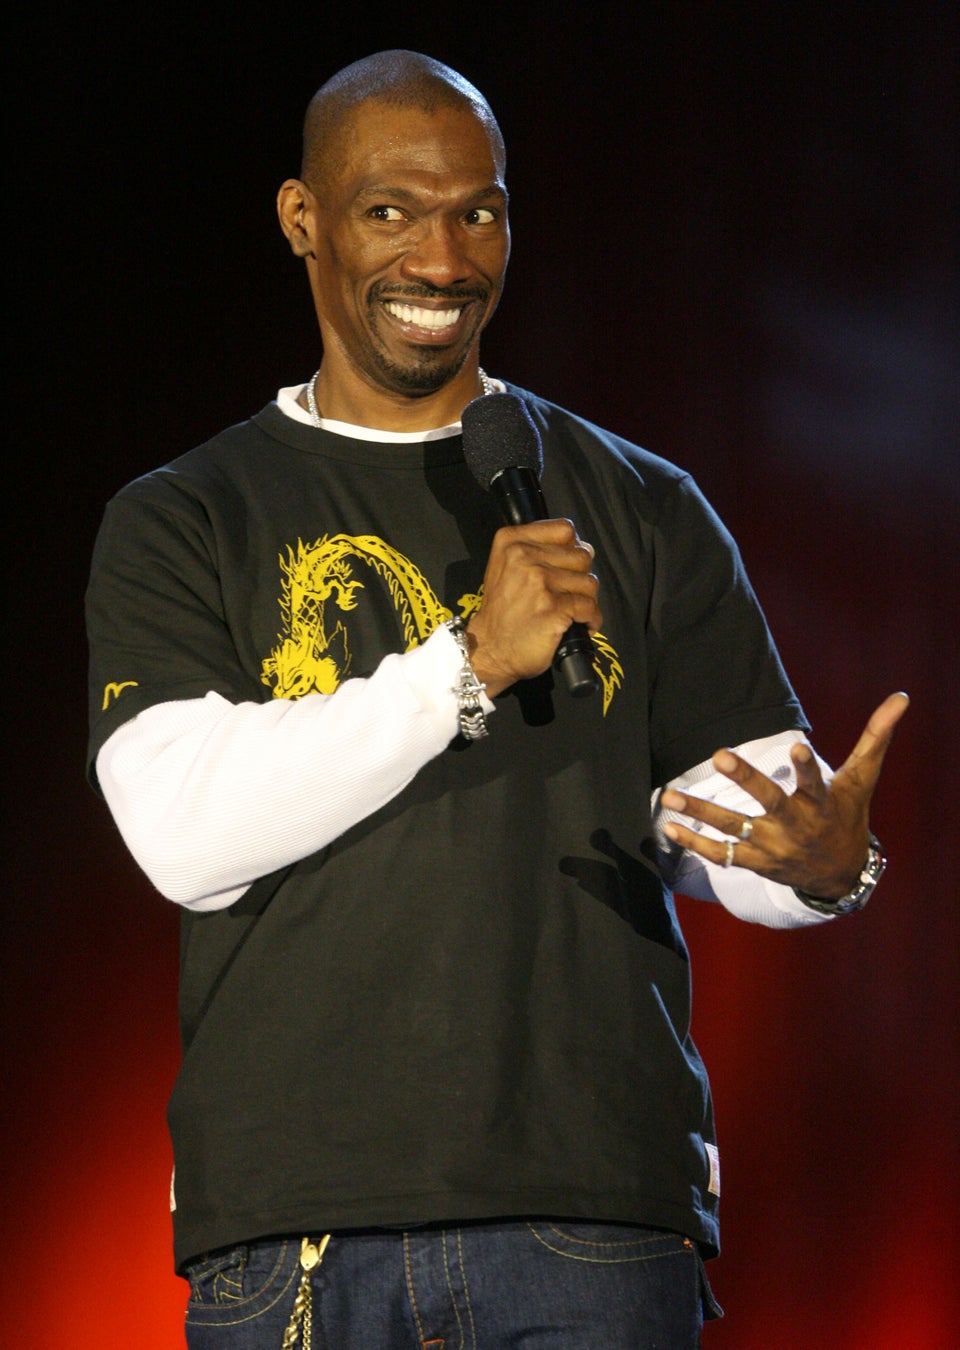 Charlie Murphy Laid To Rest: Comedians Pay Their Respects